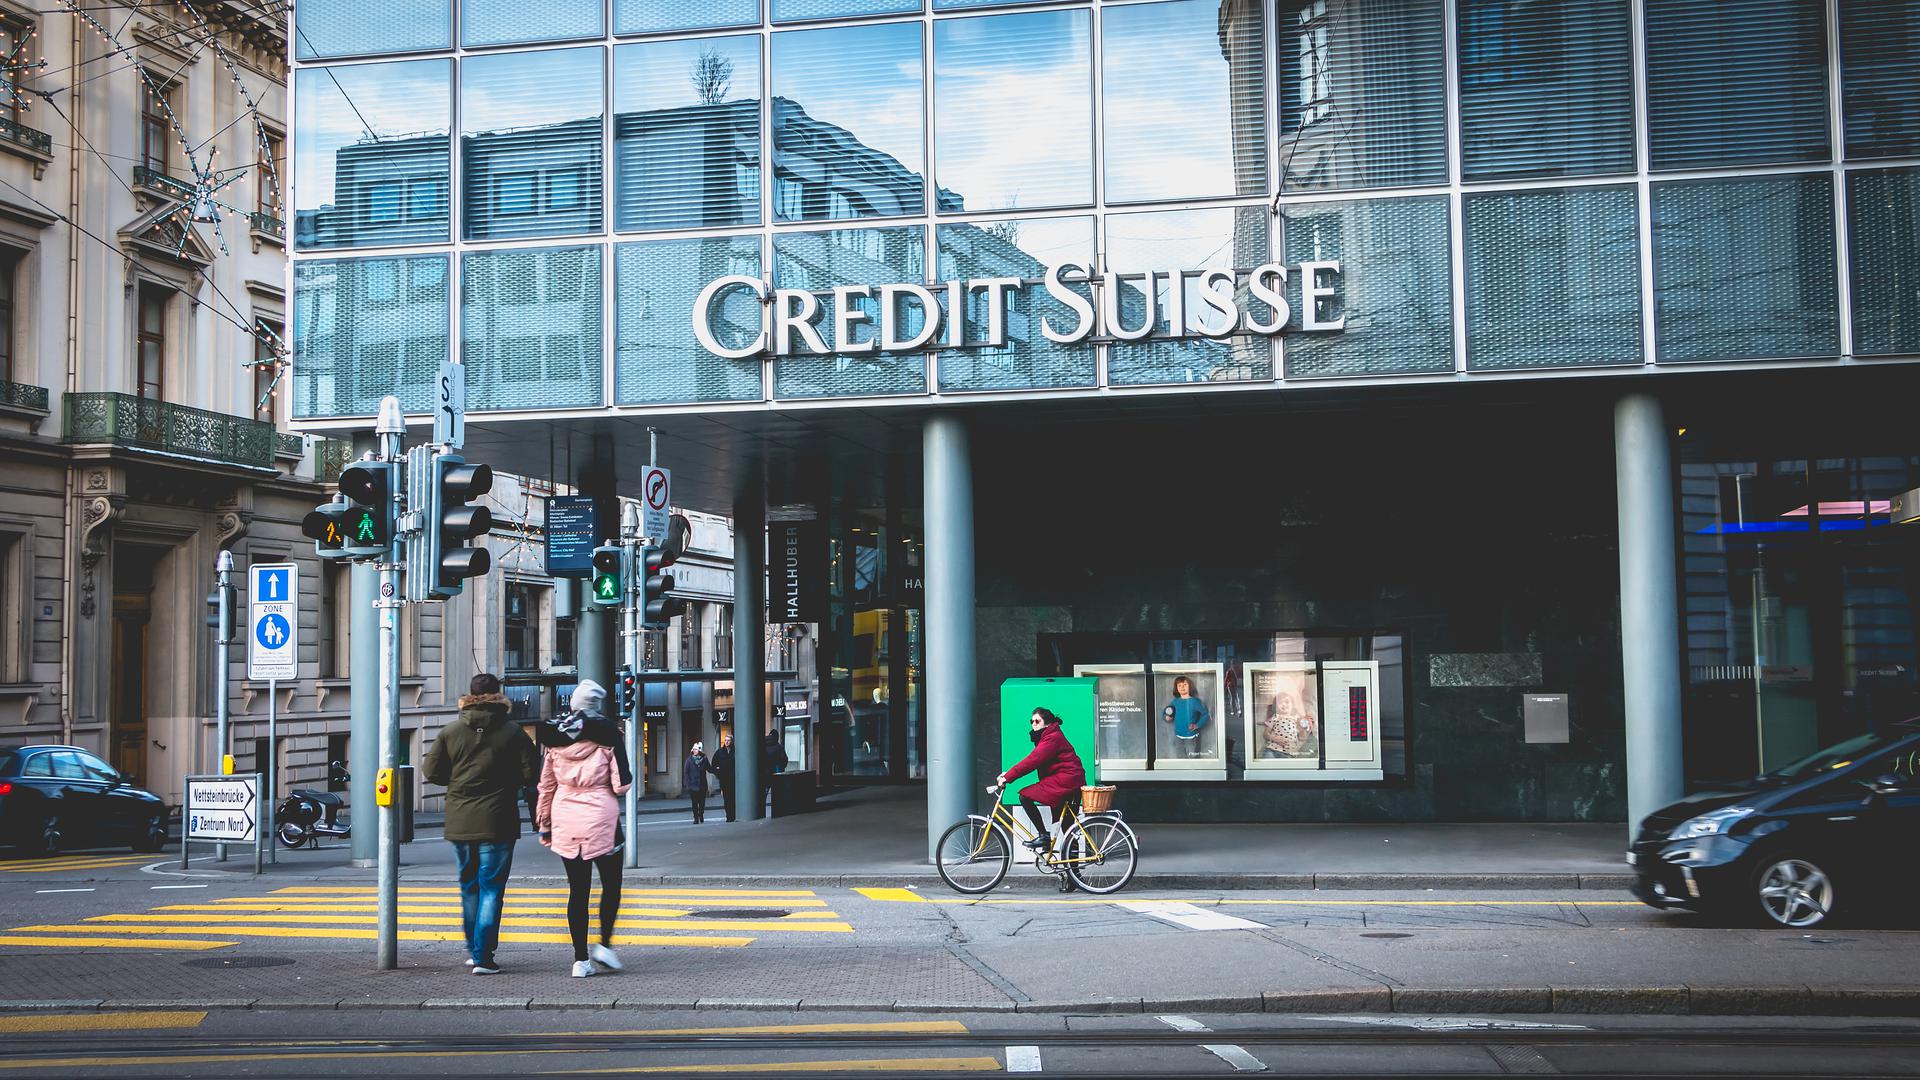 Credit Suisse looks to simplify operations following scandals and losses